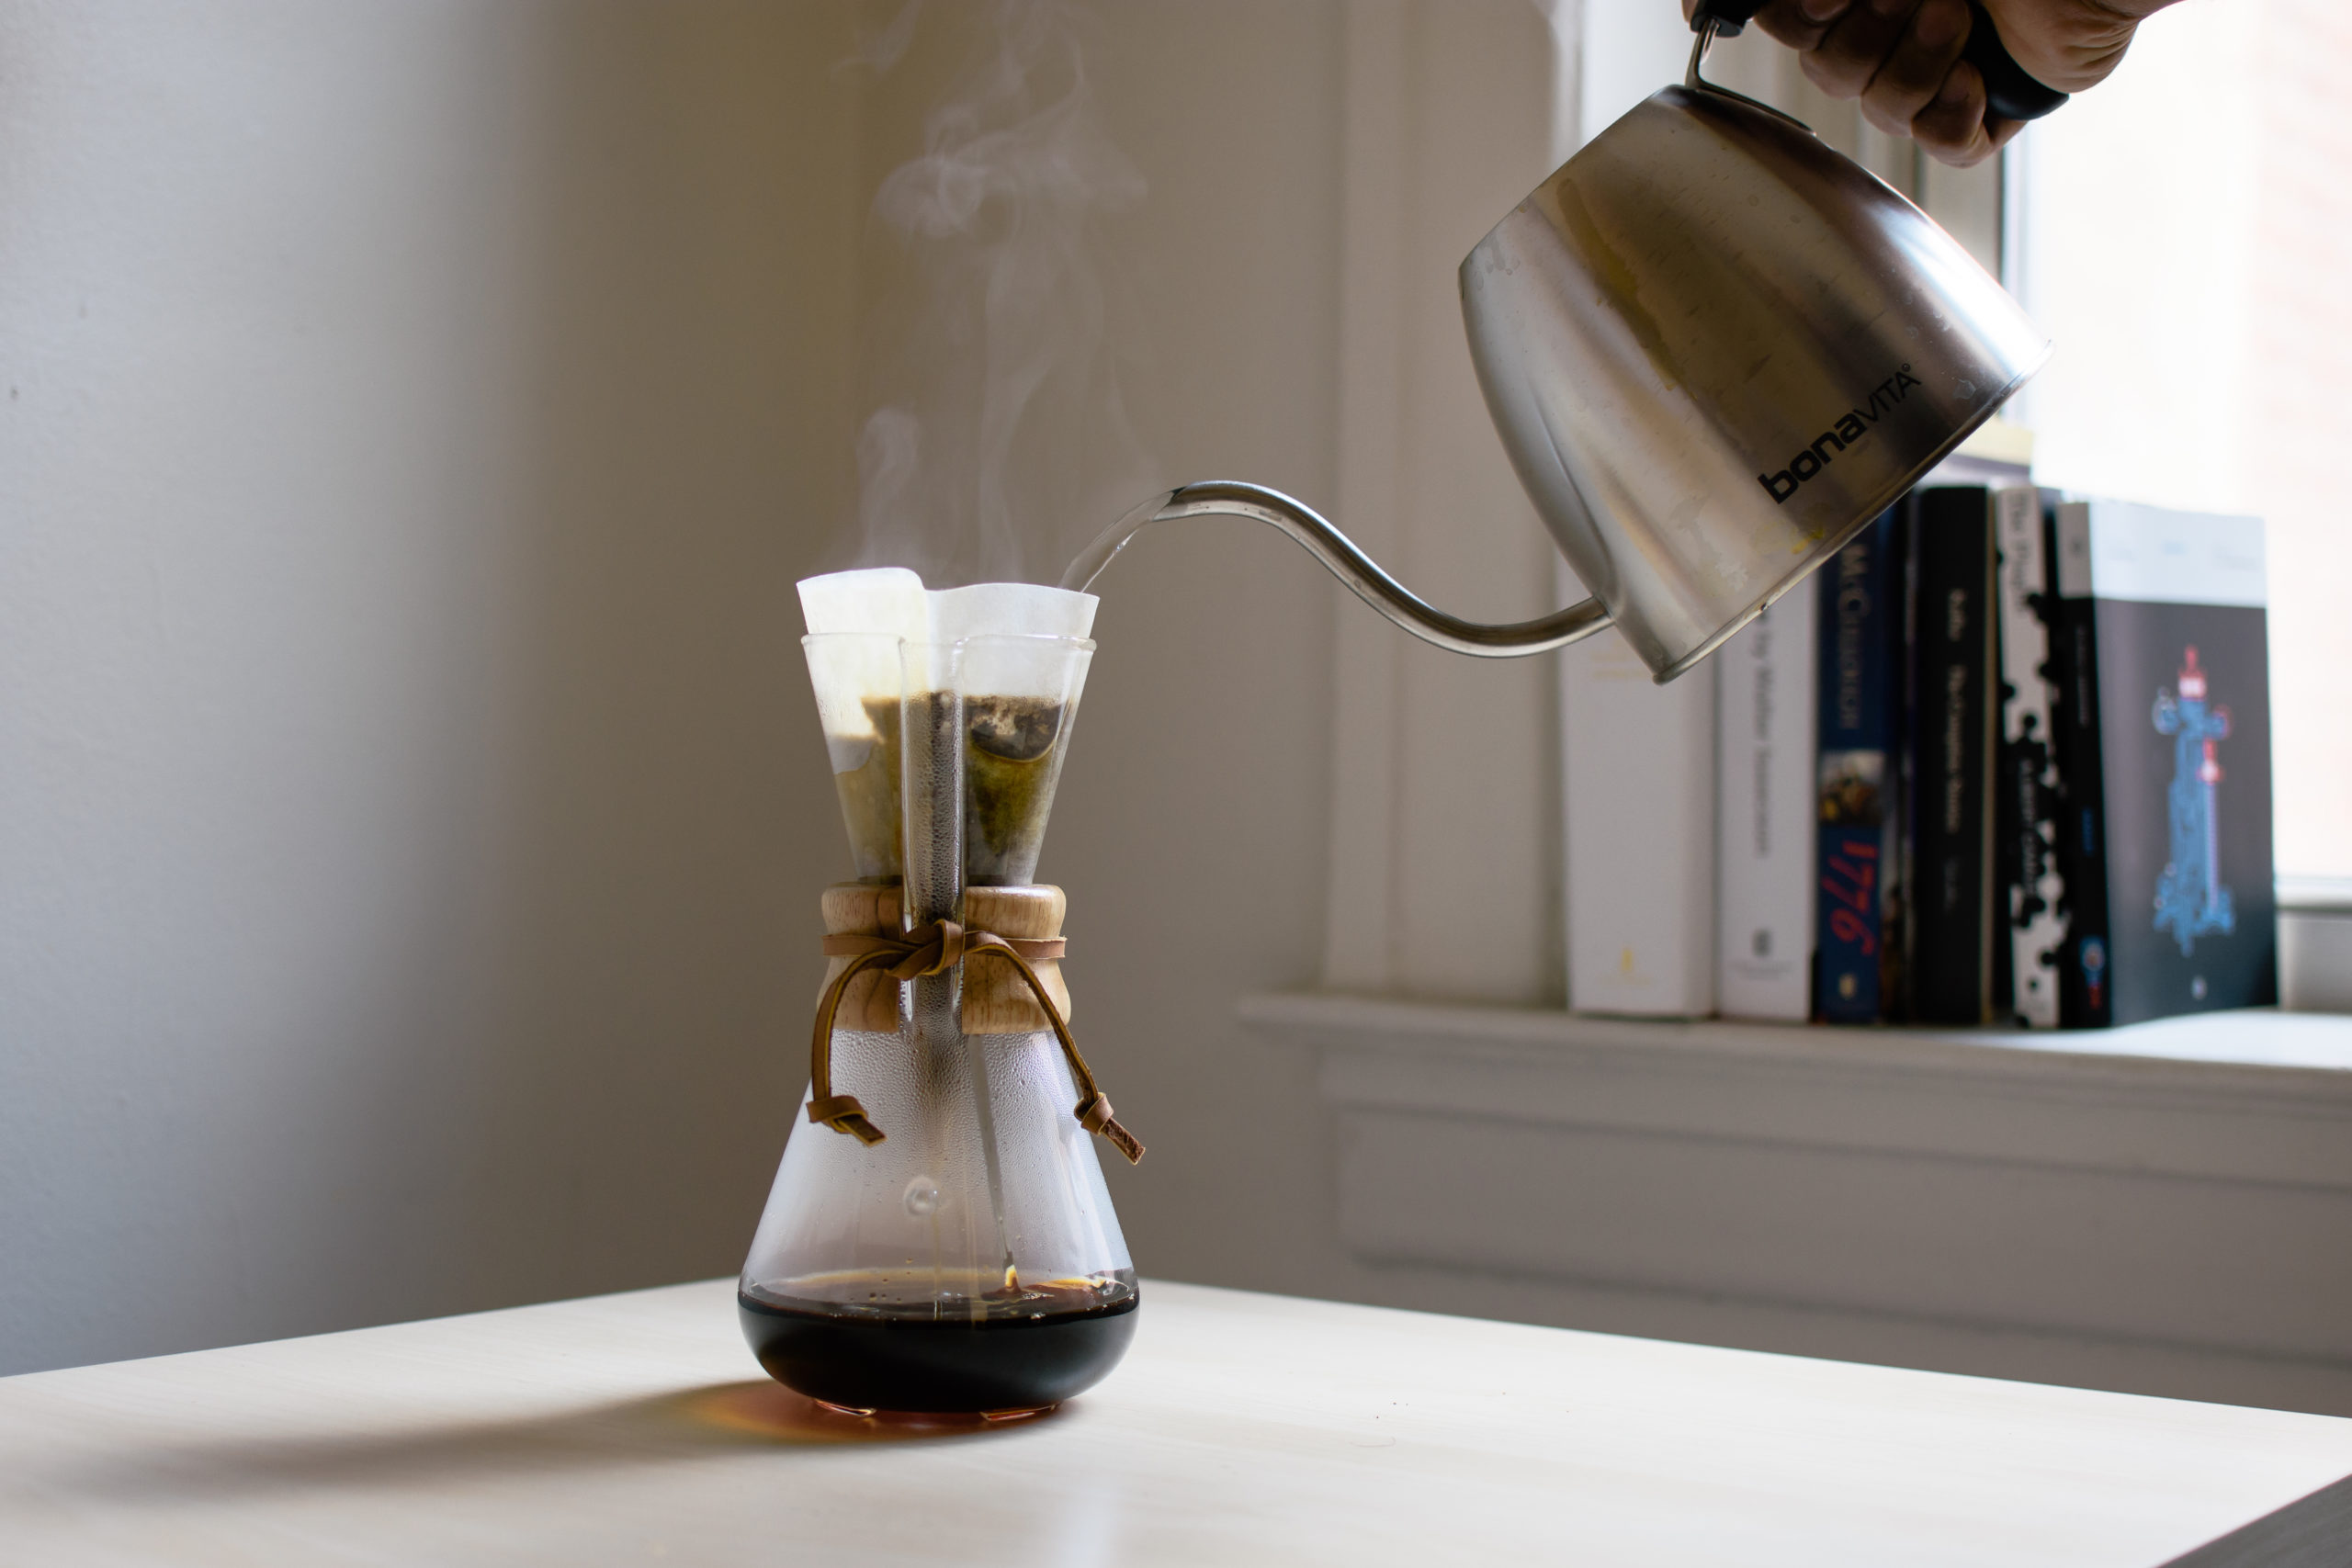 https://oldcitycoffee.com/wp-content/uploads/2016/09/Chemex-3-cup11-scaled.jpg